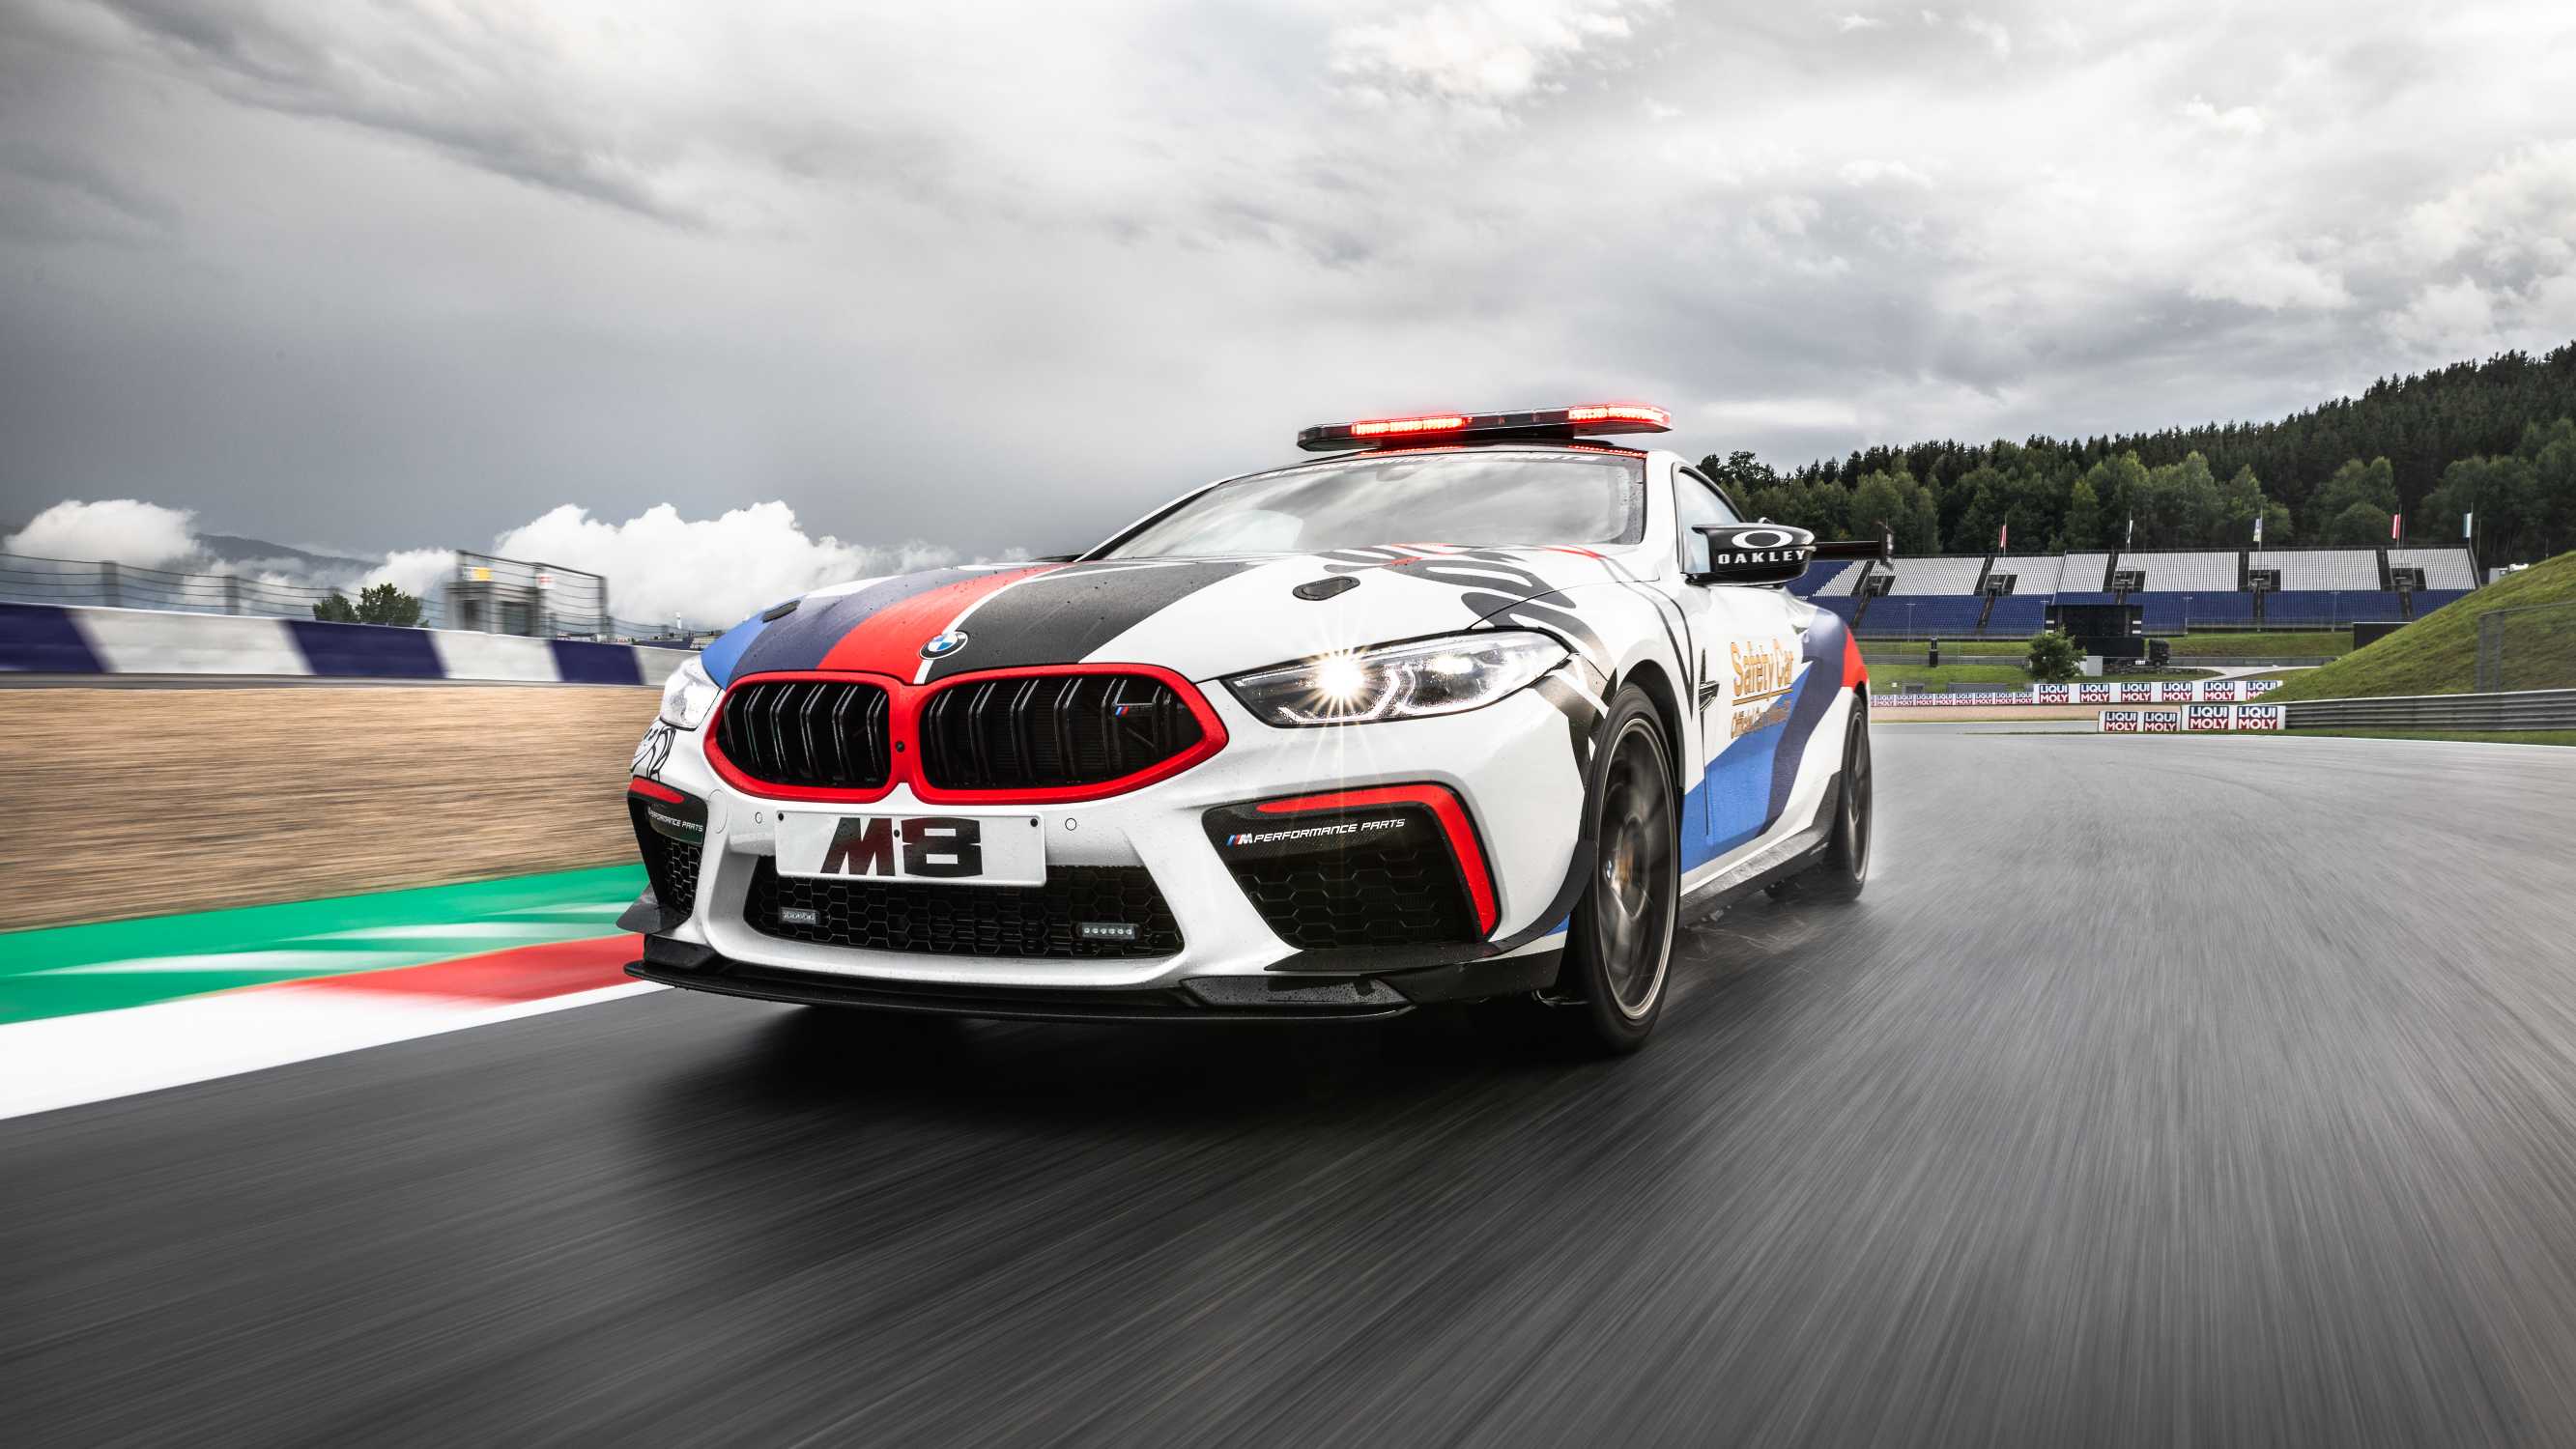 Bmw M Gmbh Official Car Of Motogp Bmw M Motogp Safety Car Based On The Bmw M Competition Coupe